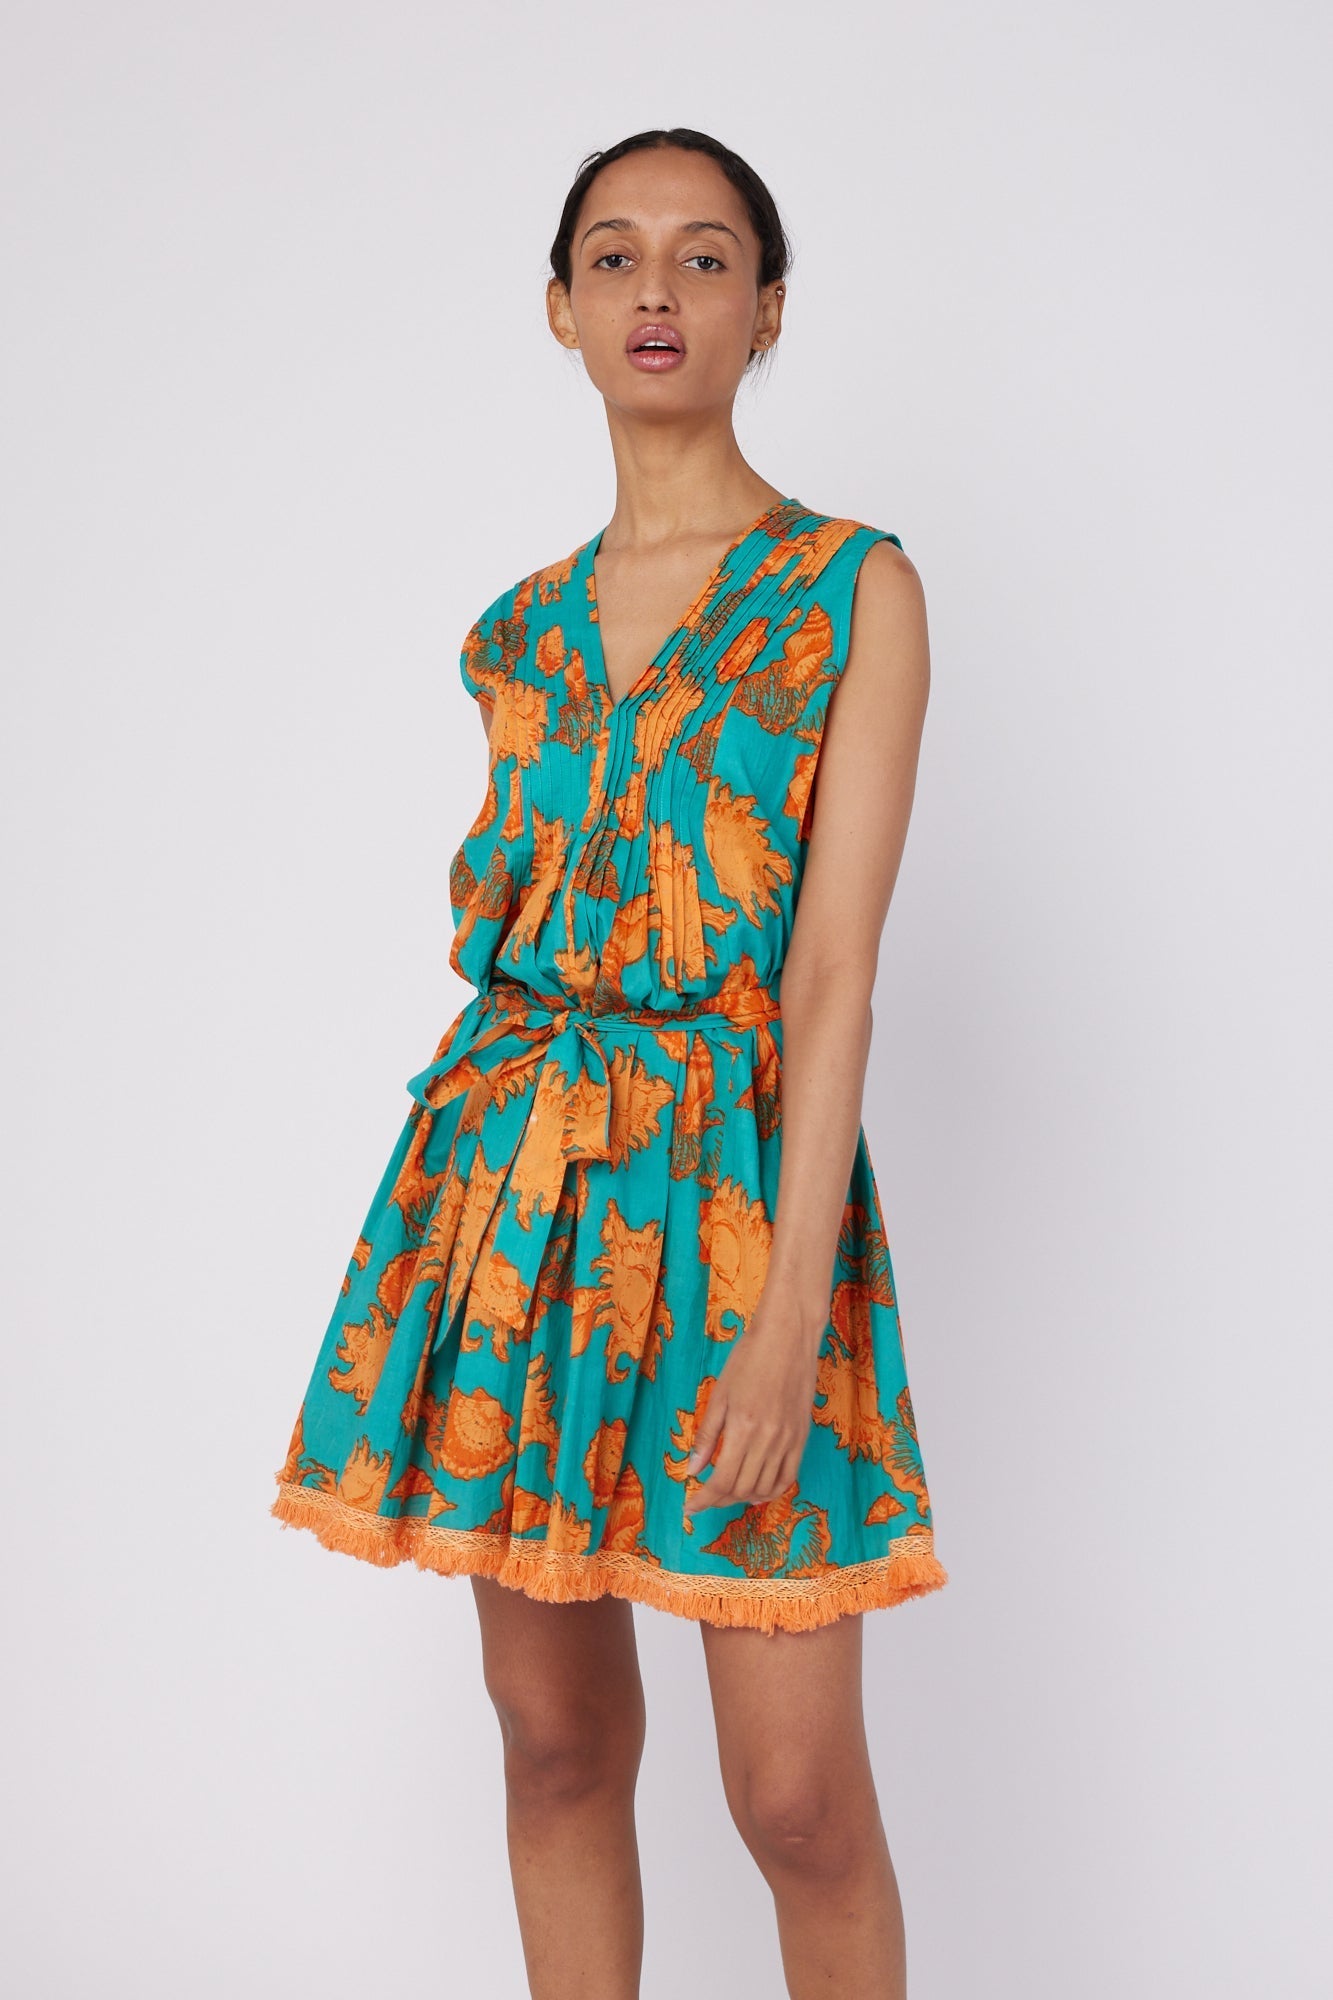 ModaPosa Felice Sleeveless V-Neck Puntuck Knee Length Dress with Detachable Belt in Turquoise Orange Shells . Discover women's resort dresses and lifestyle clothing inspired by the Mediterranean. Free worldwide shipping available!